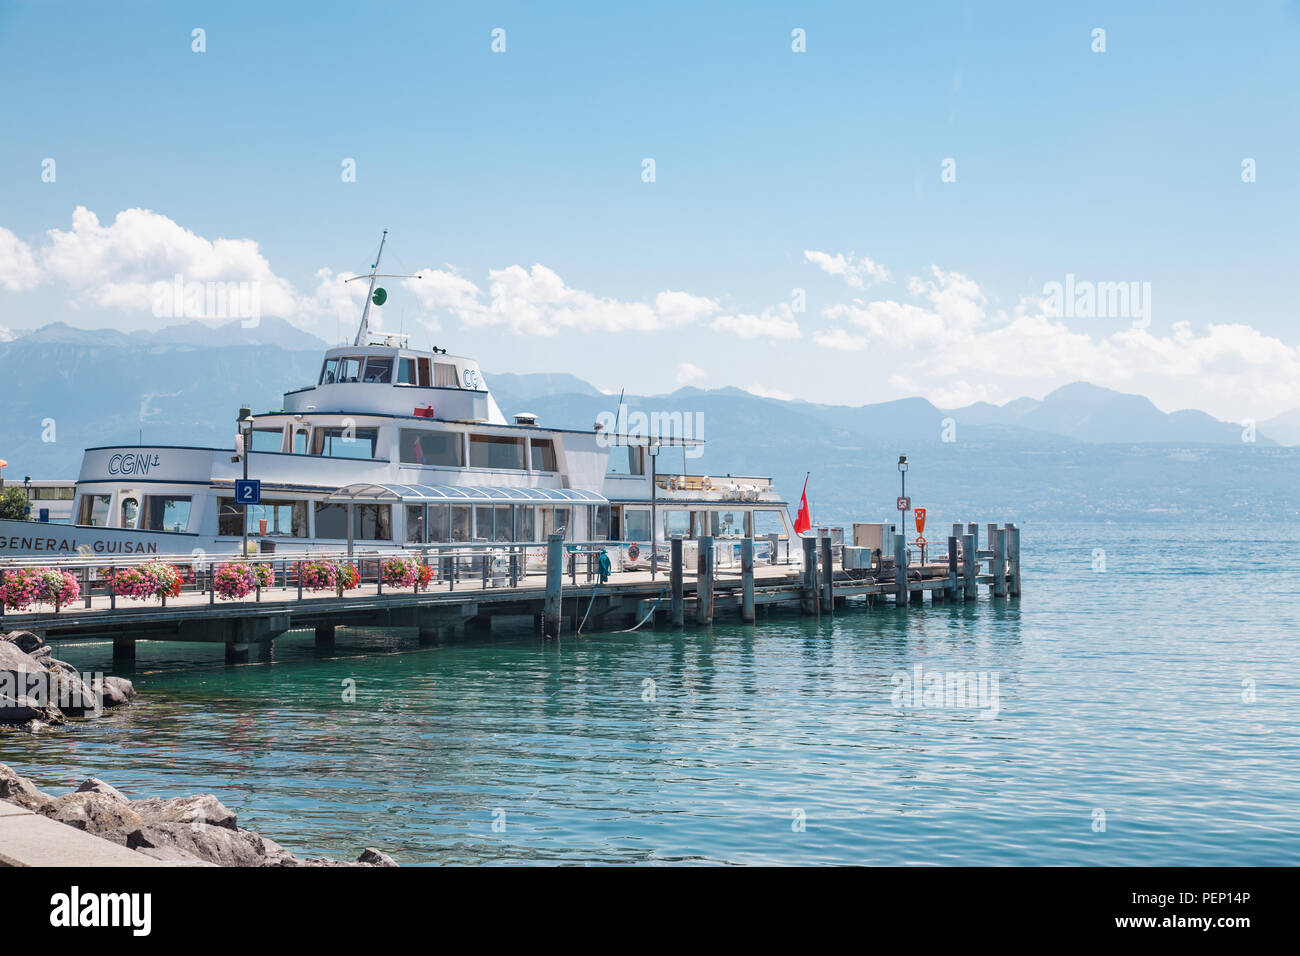 Passenger ship docked at pier in Lausanne Ouchy port, Switzerland on Lake Leman (Geneva Lake) on sunny summer day Stock Photo